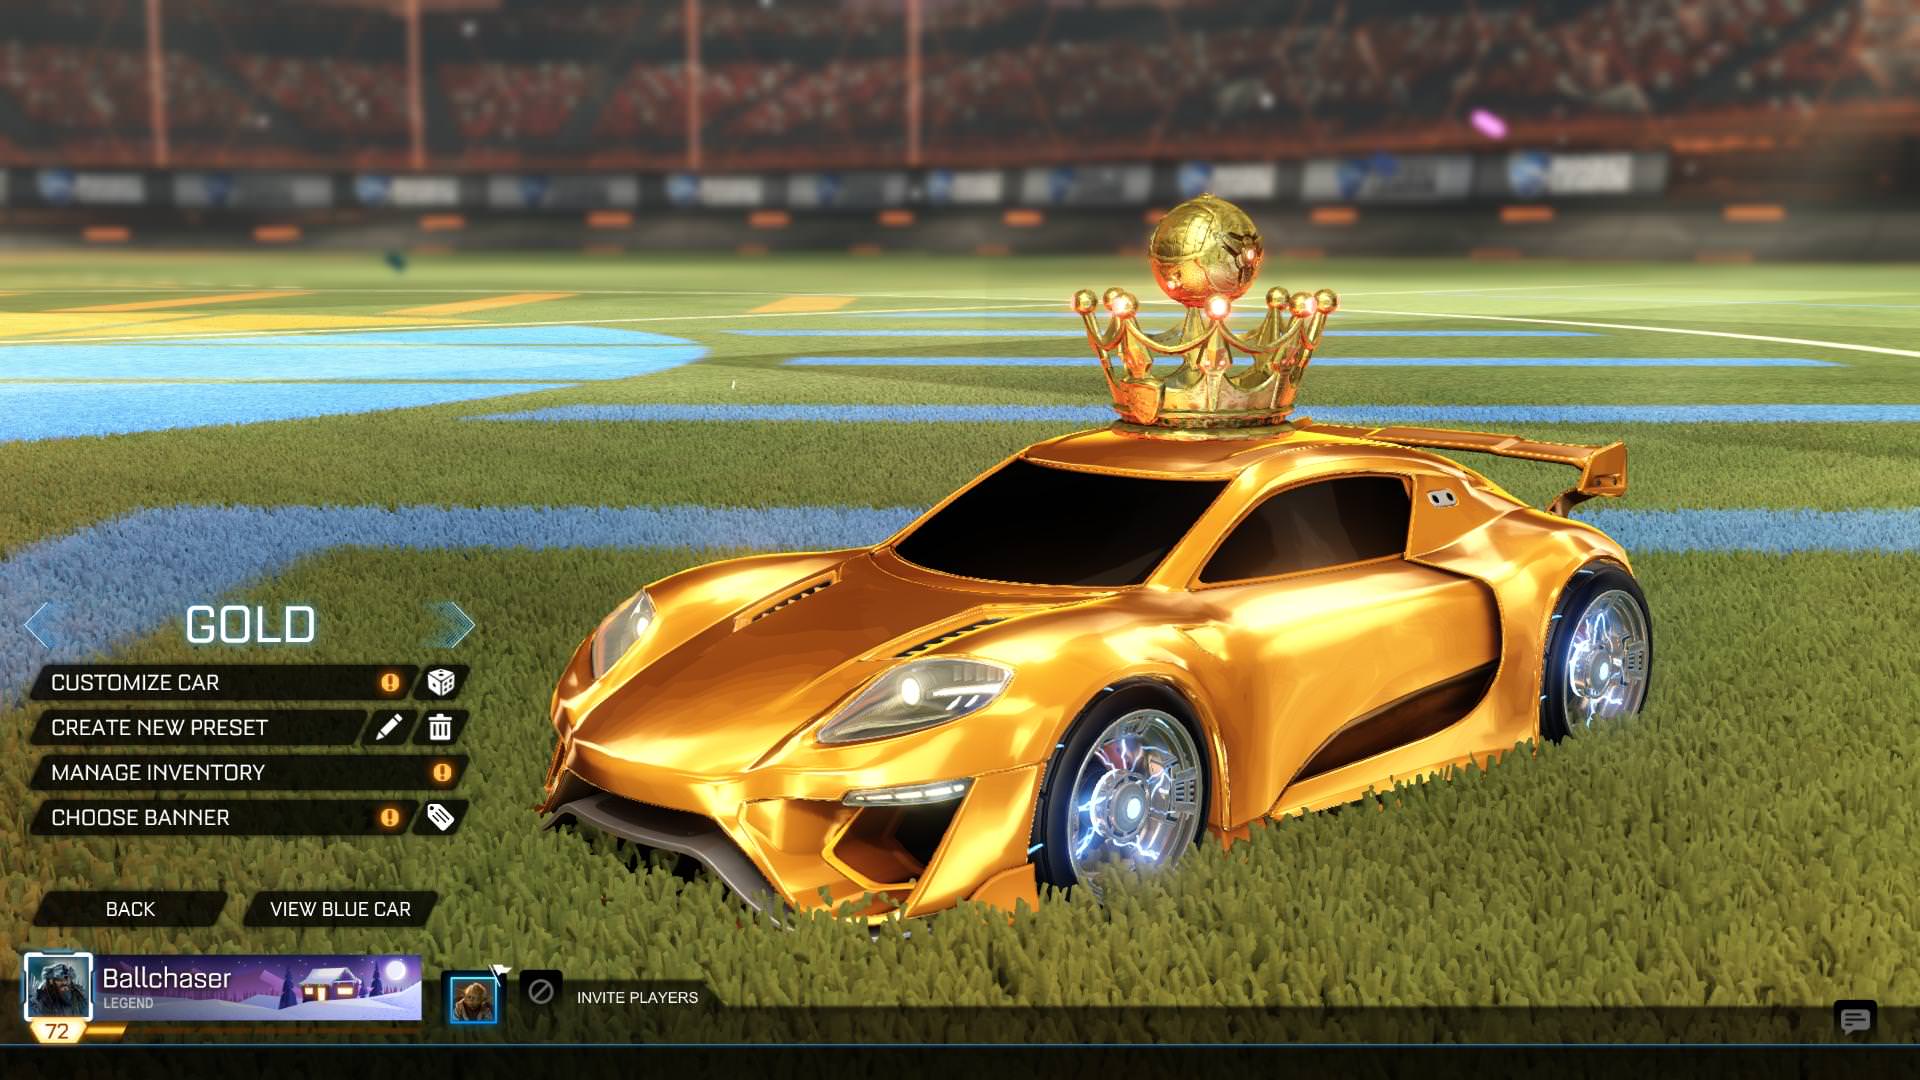 Quite happy how my golden car turned out. : RocketLeague